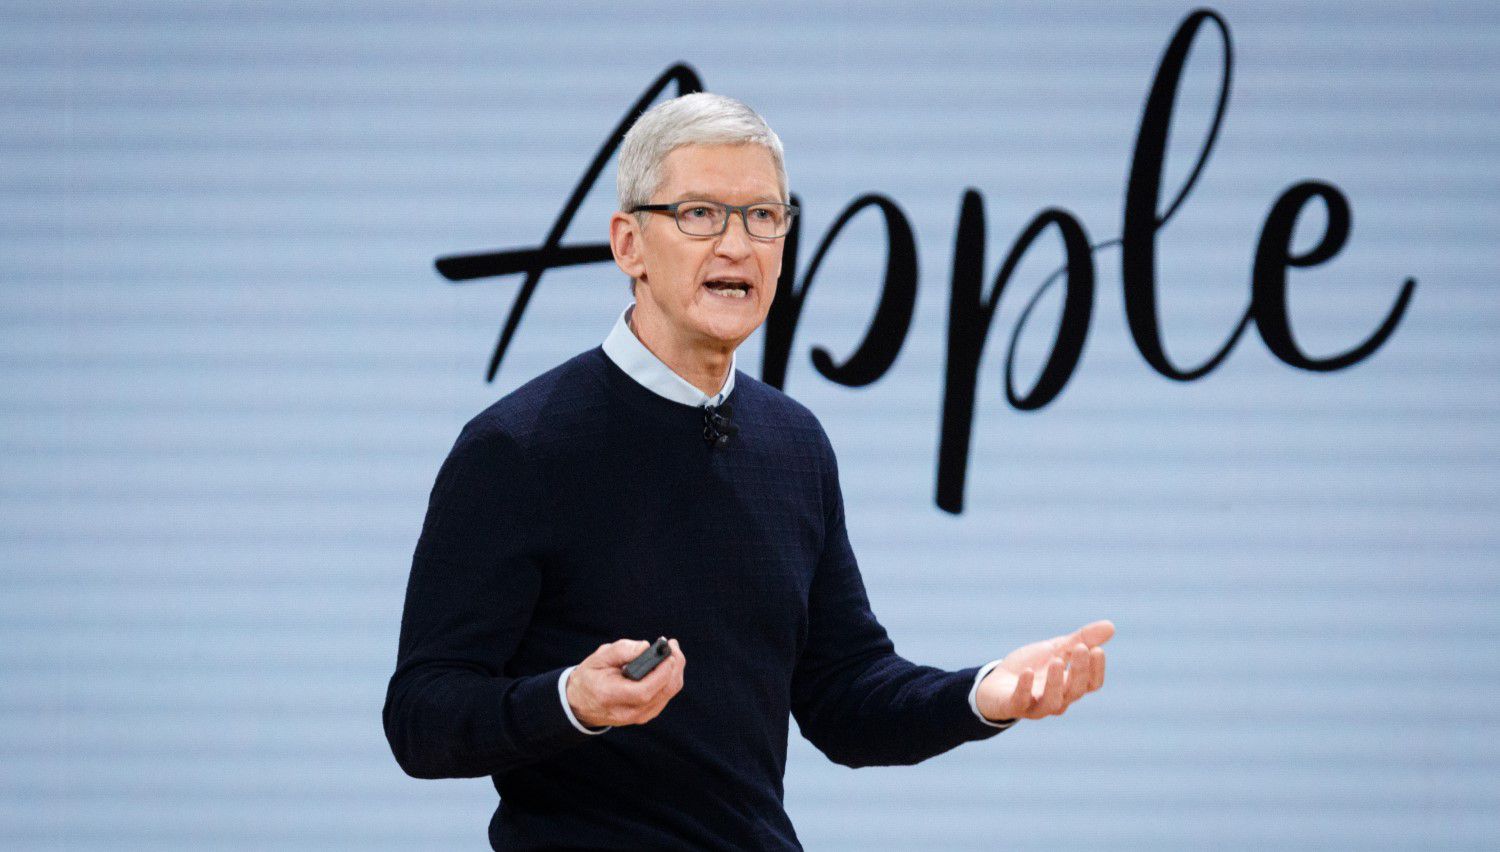 Apple-ceo-tim-cook-reveals-he-owns-crypto-but-has-no-plans-to-buy-it-for-the-company